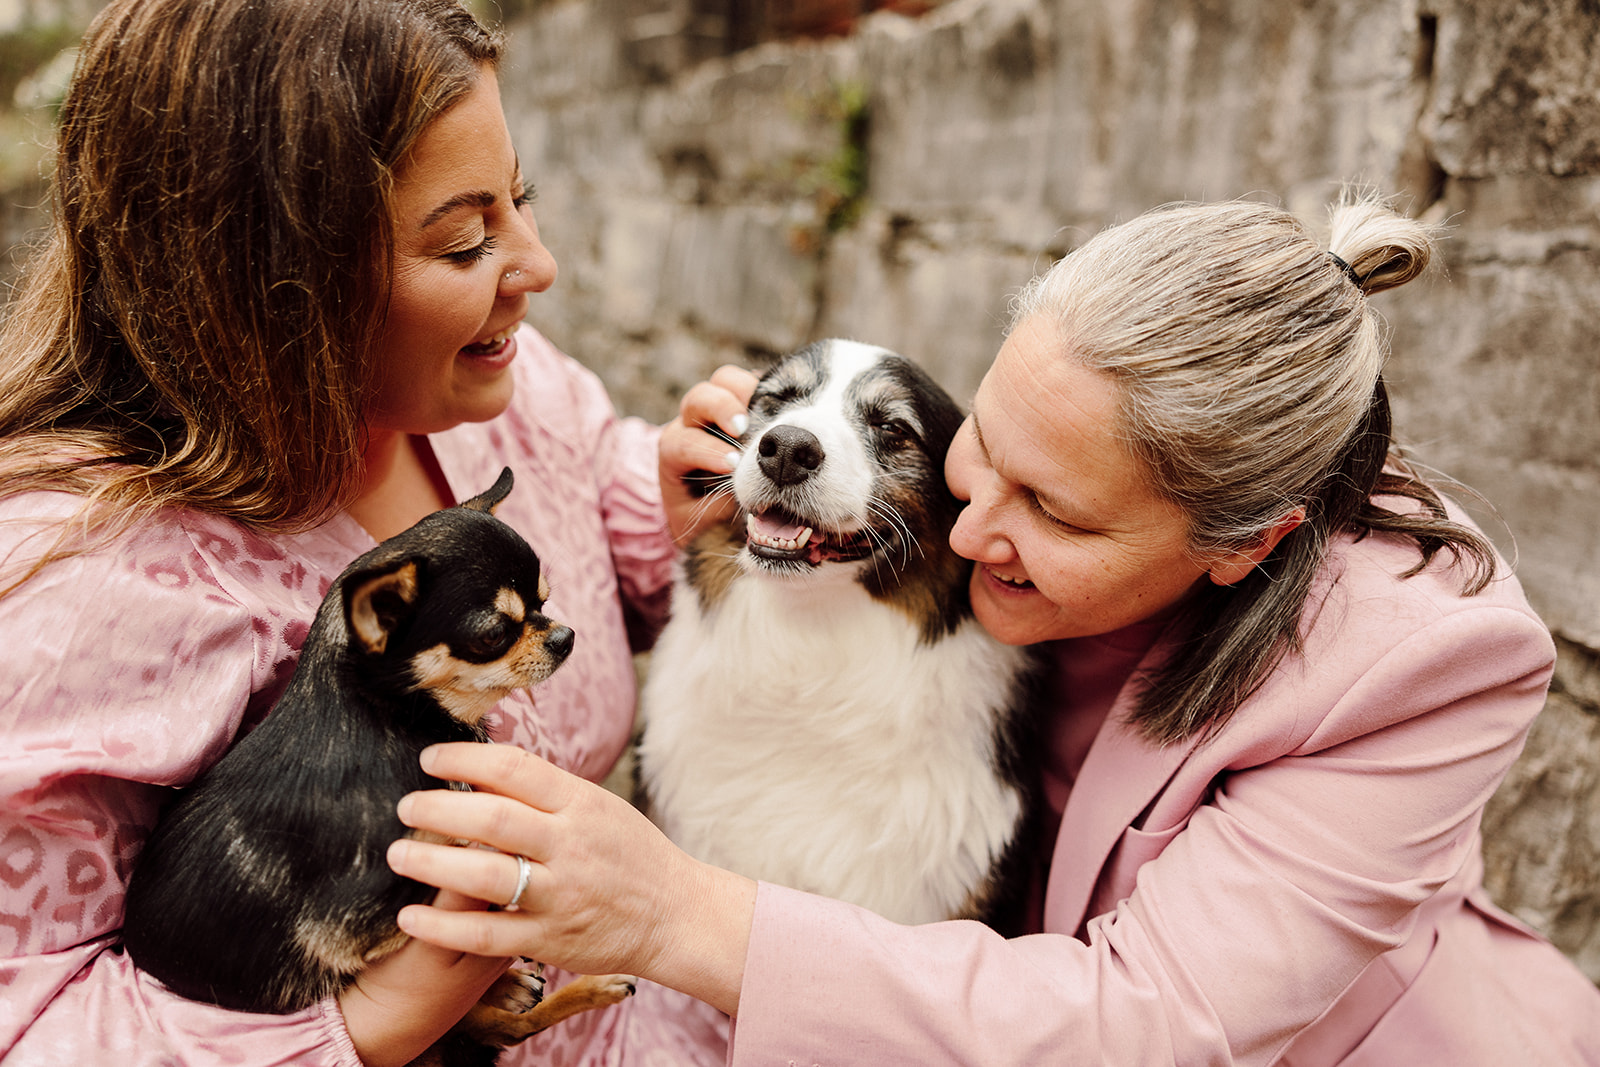 Women smiling and holding small dogs during their City Engagement Session